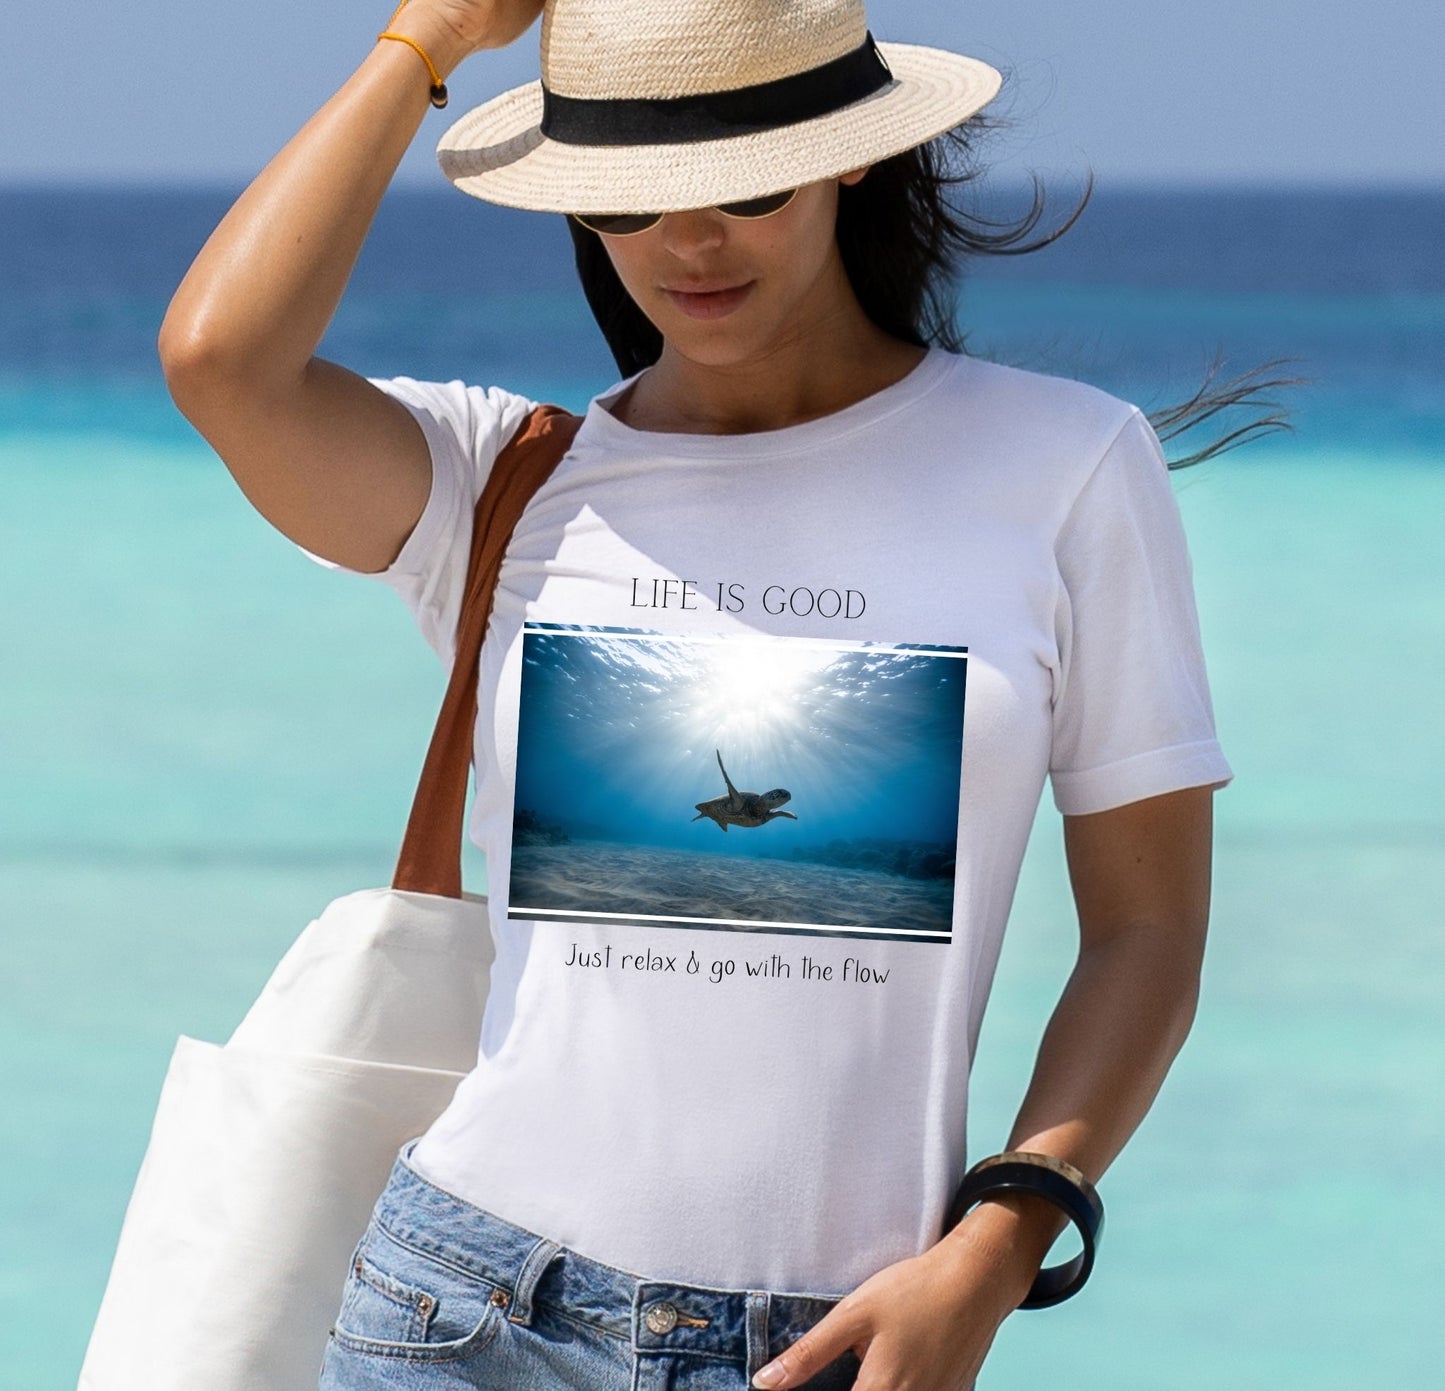 Life is Good, Relax and Go with the flow Sea turtle  beach shirt